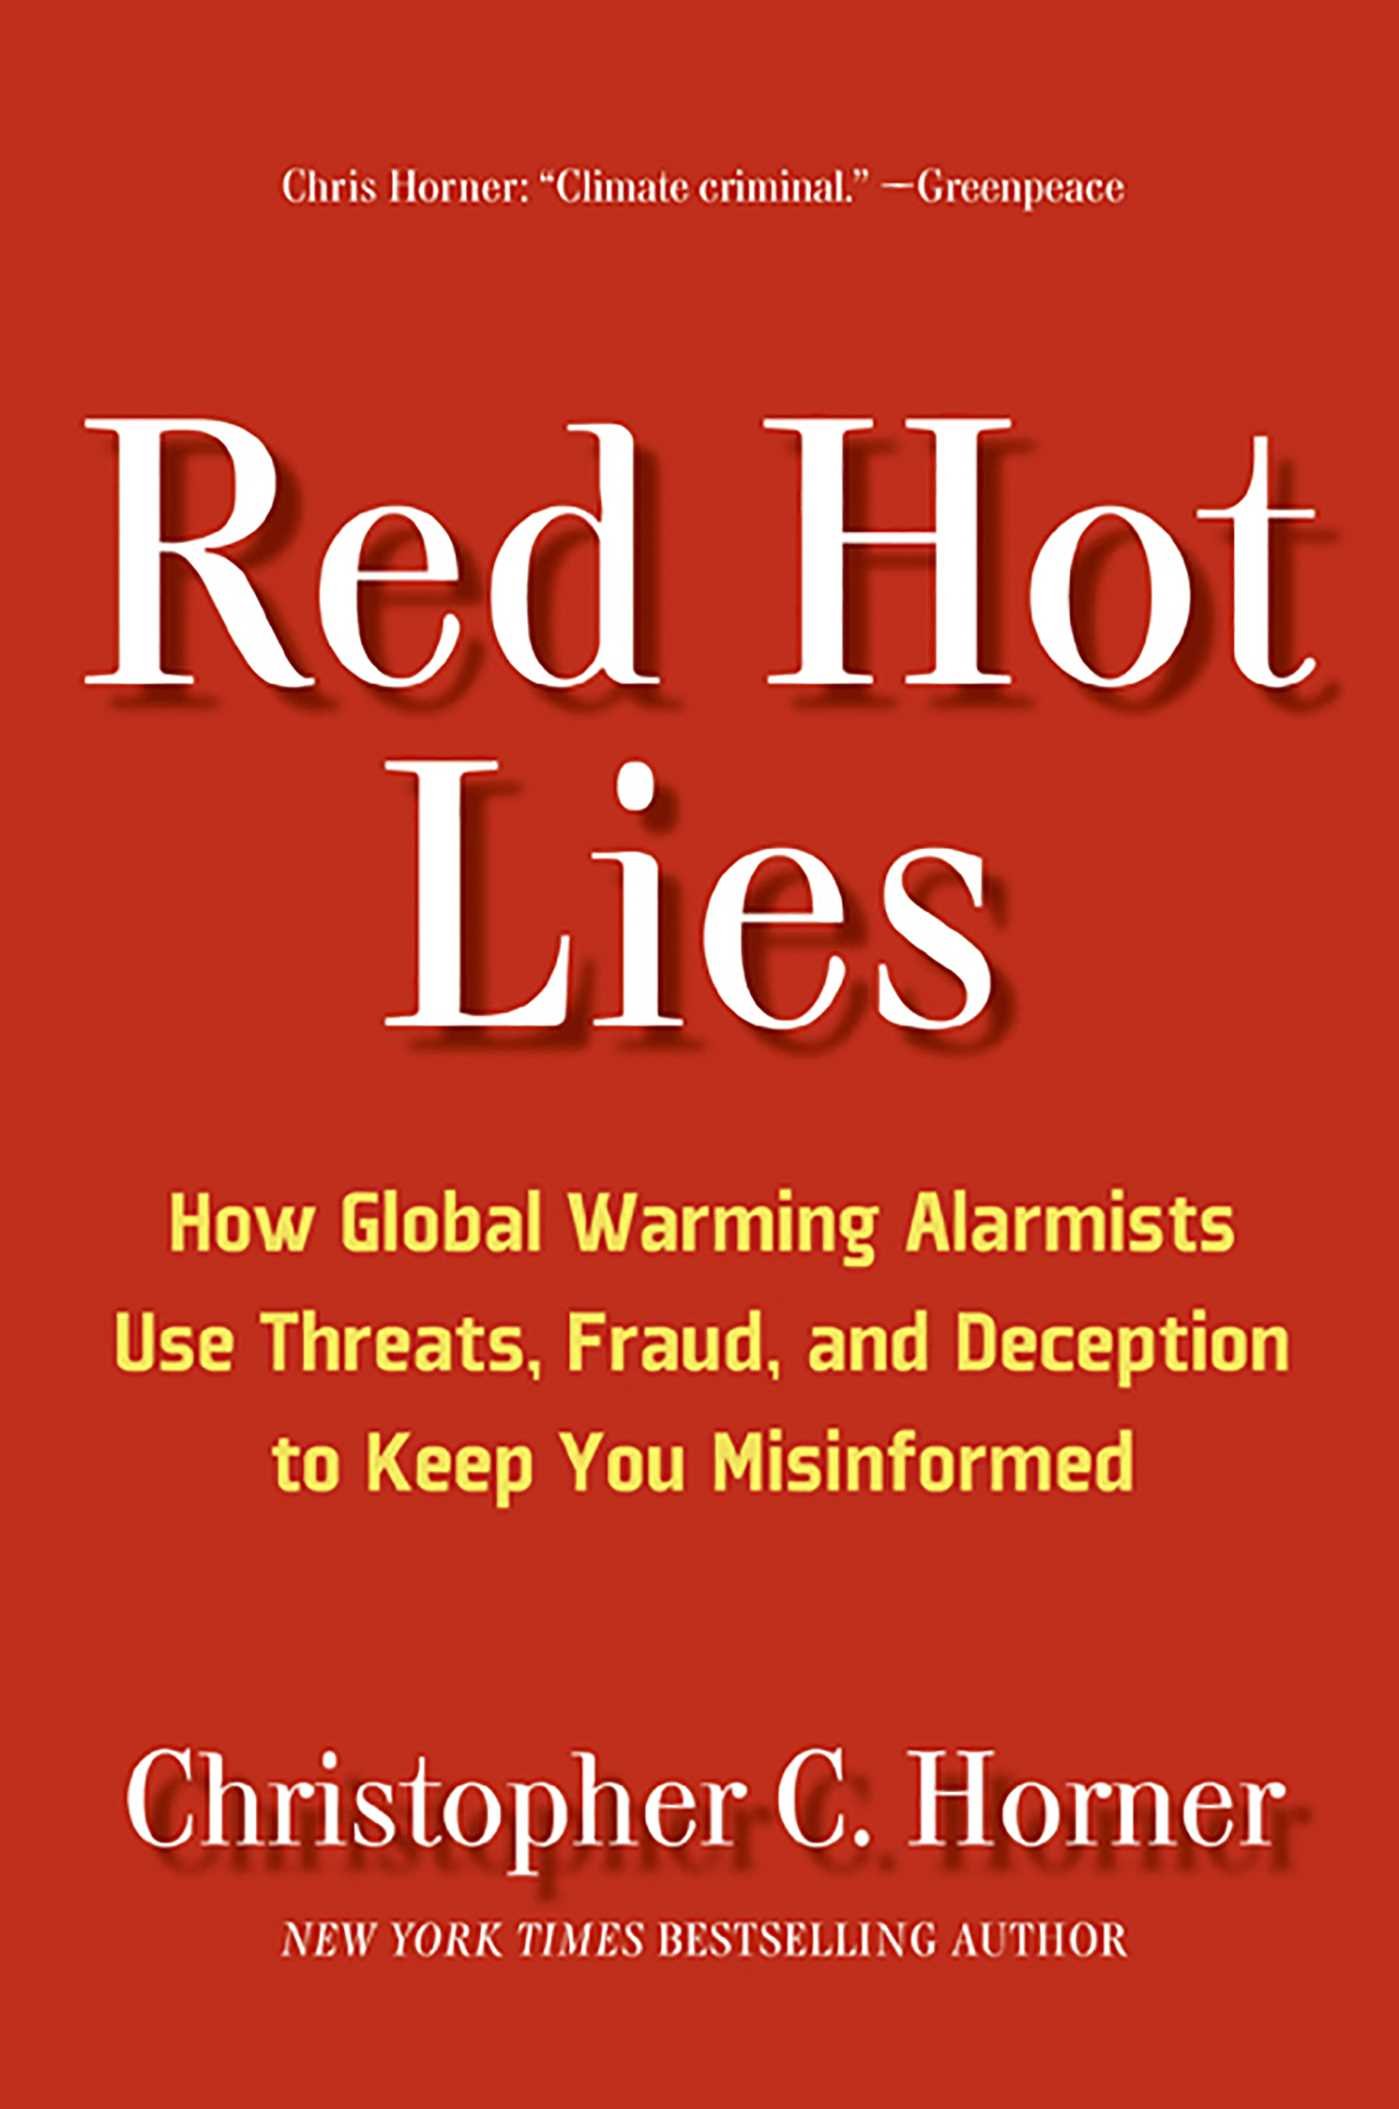 Red Hot Lies: How Global Warming Alarmists Use Threats, Fraud, and Deception to Keep You Misinformed